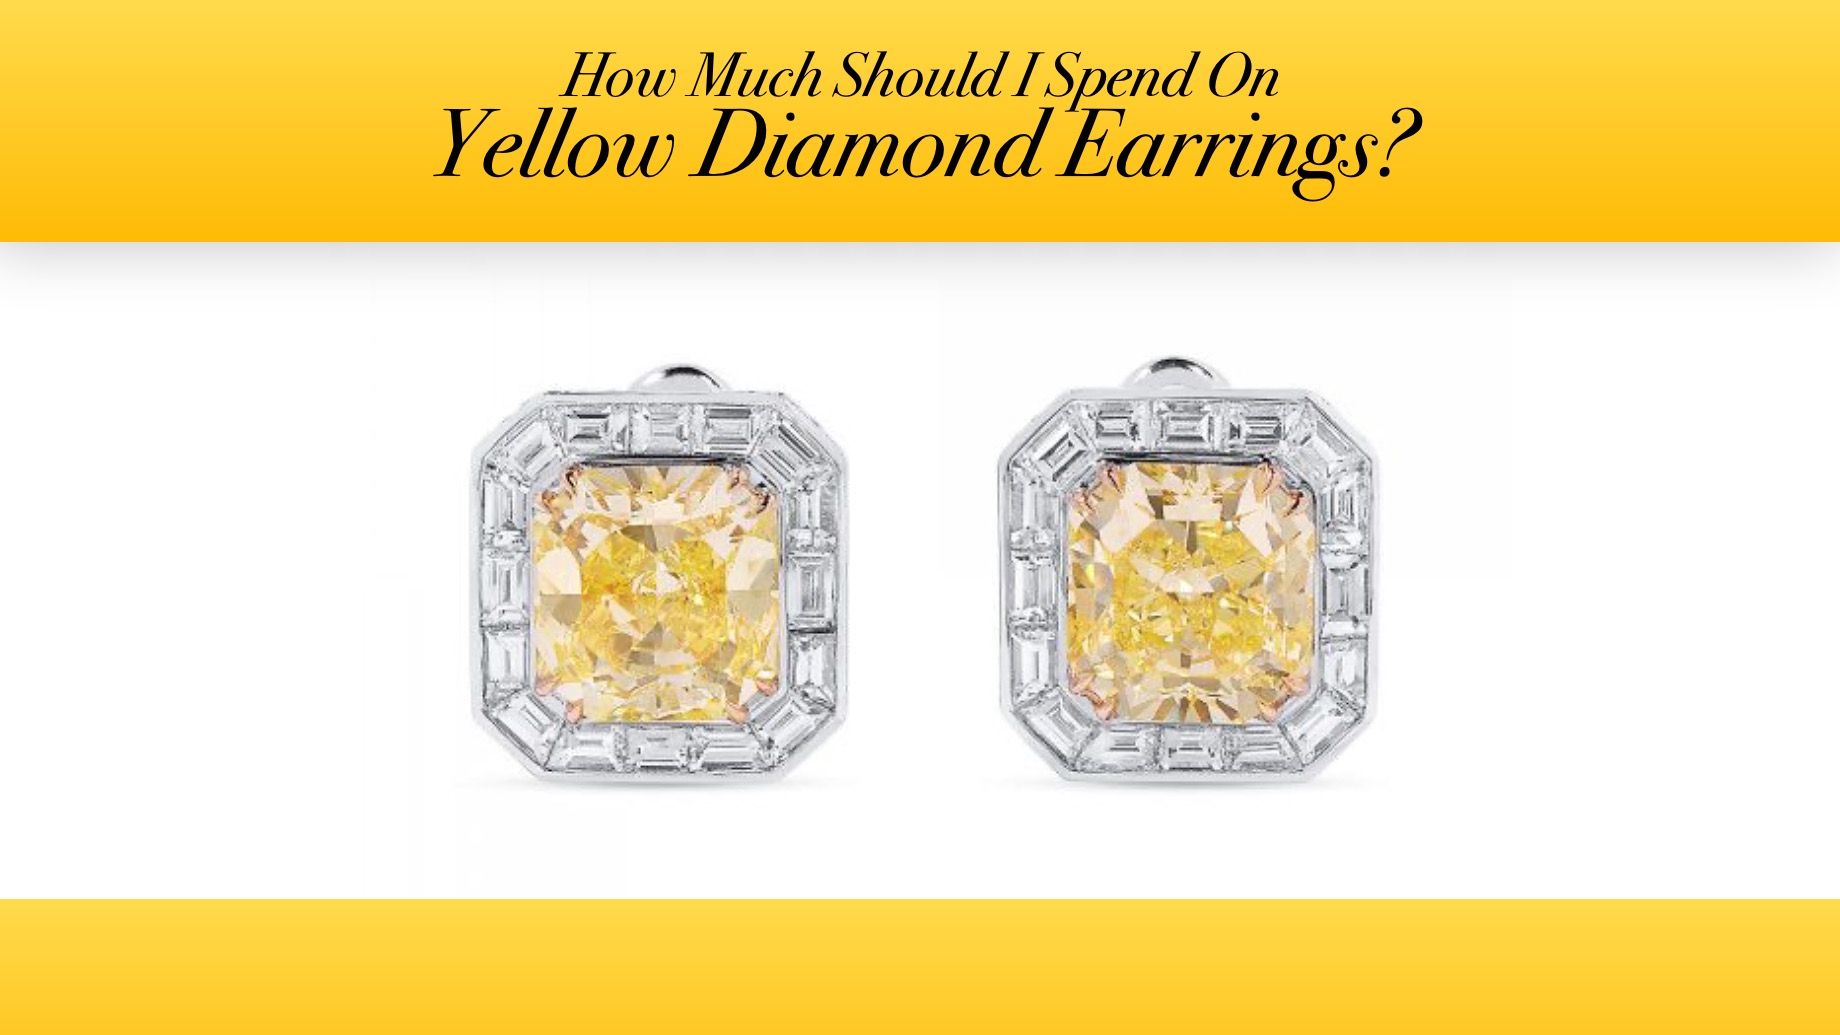 How Much Should I Spend On Yellow Diamond Earrings?